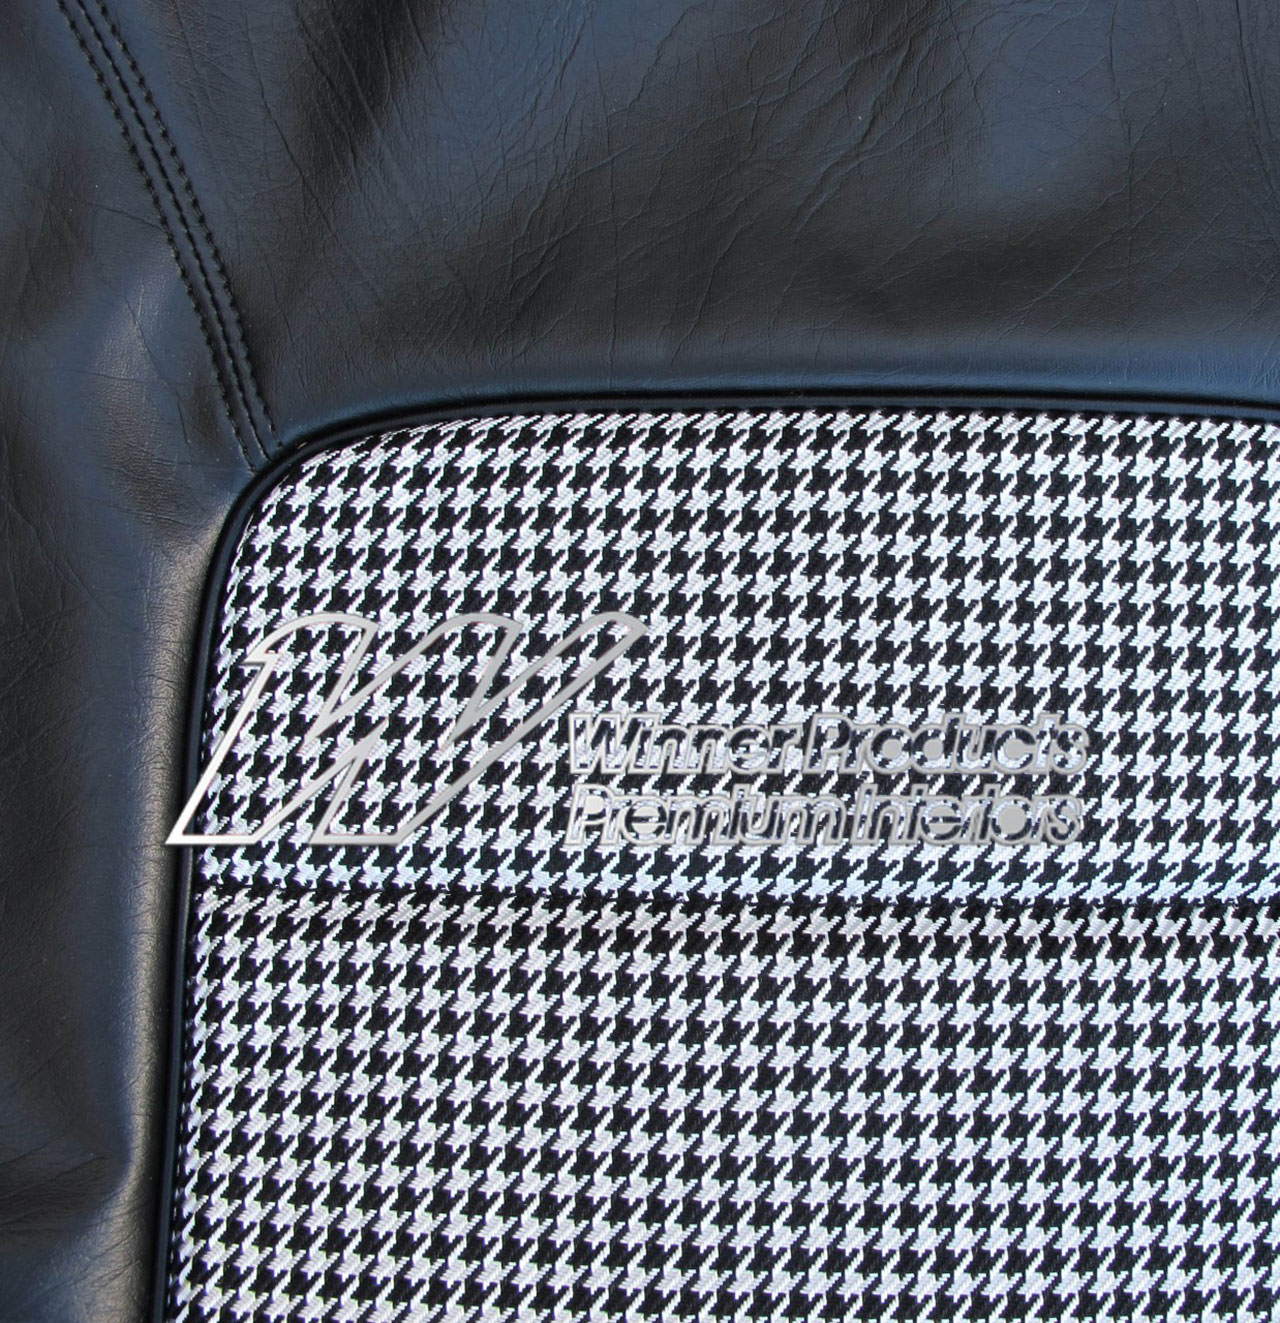 Holden Monaro HQ Monaro GTS Coupe Sep-Feb 73 10Y Black & Houndstooth Seat Covers (Image 3 of 10)